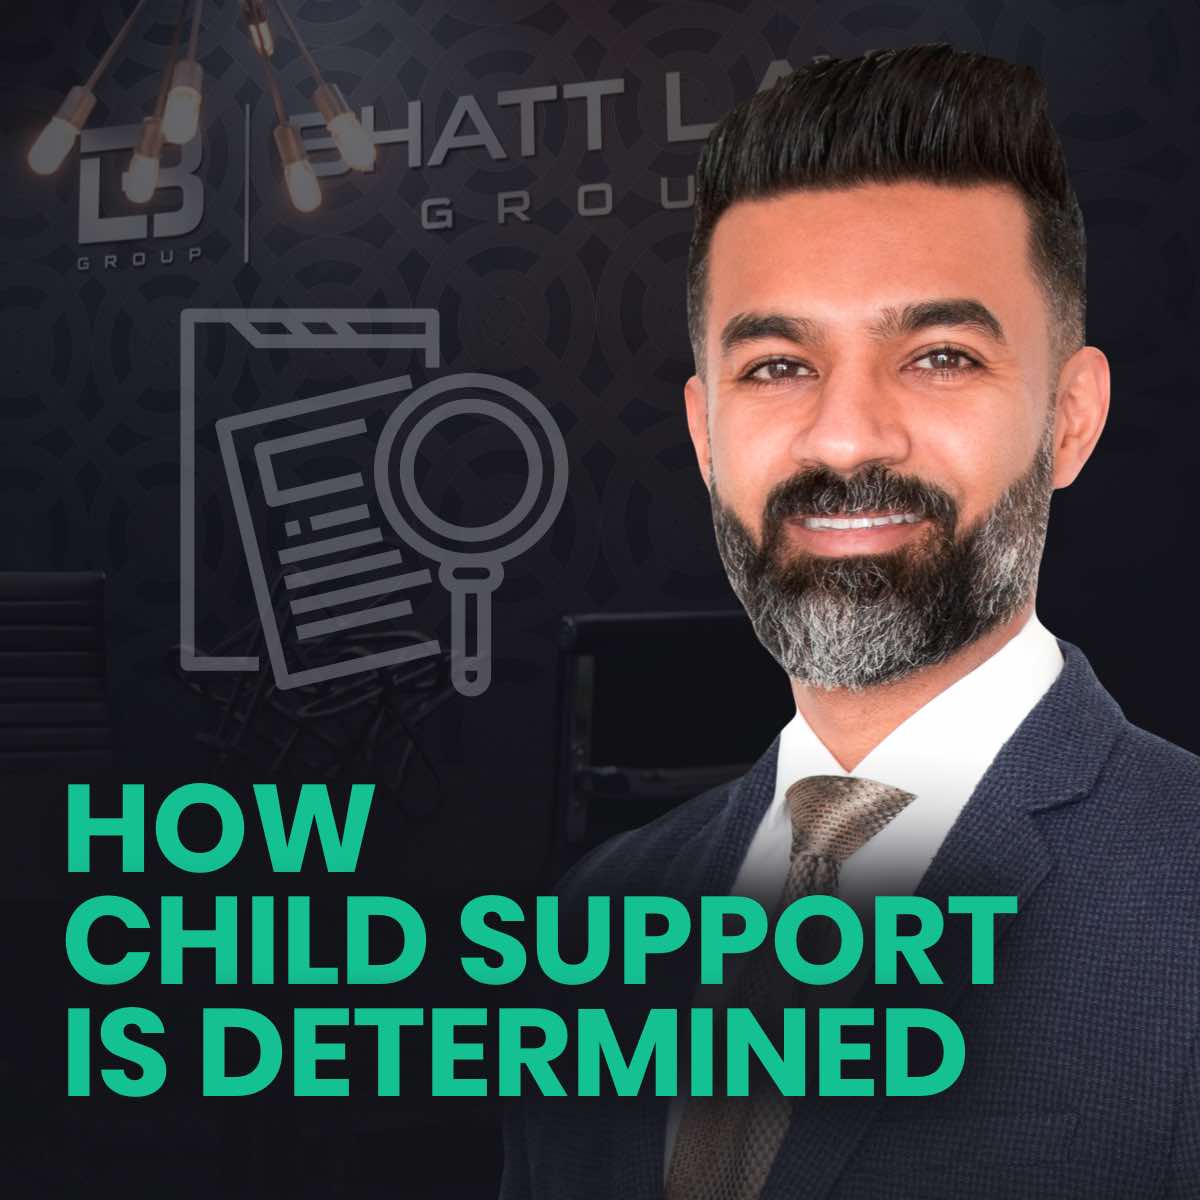 Bhatt Law Group - How Child Support is Determined